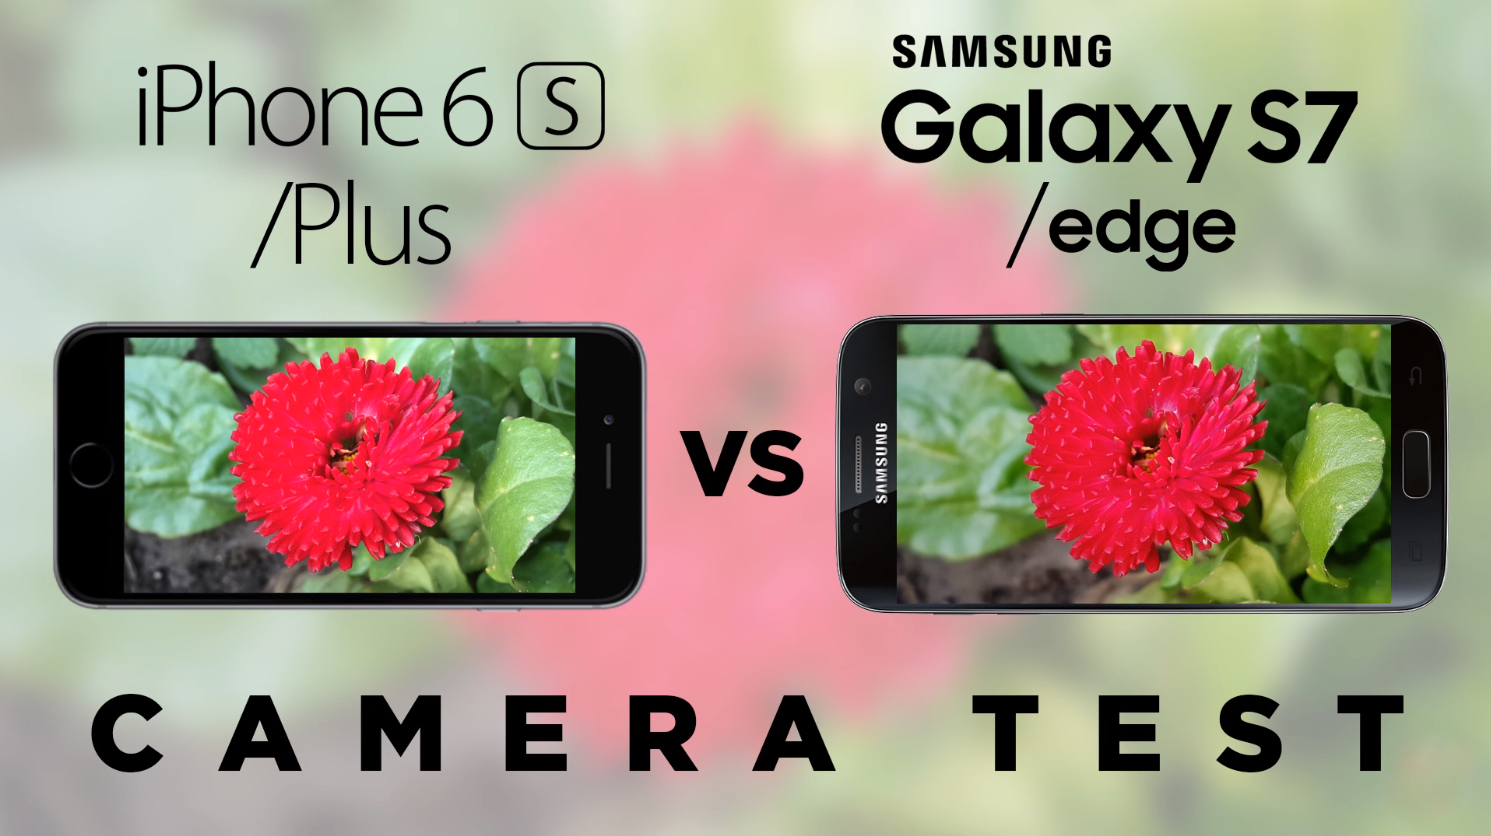 galaxy-s7-trounces-iphone-6s-in-camera-tests-image-cultofandroidcomwp-contentuploads201603Galaxy-S7-vs-iPhone-6s-camera-png